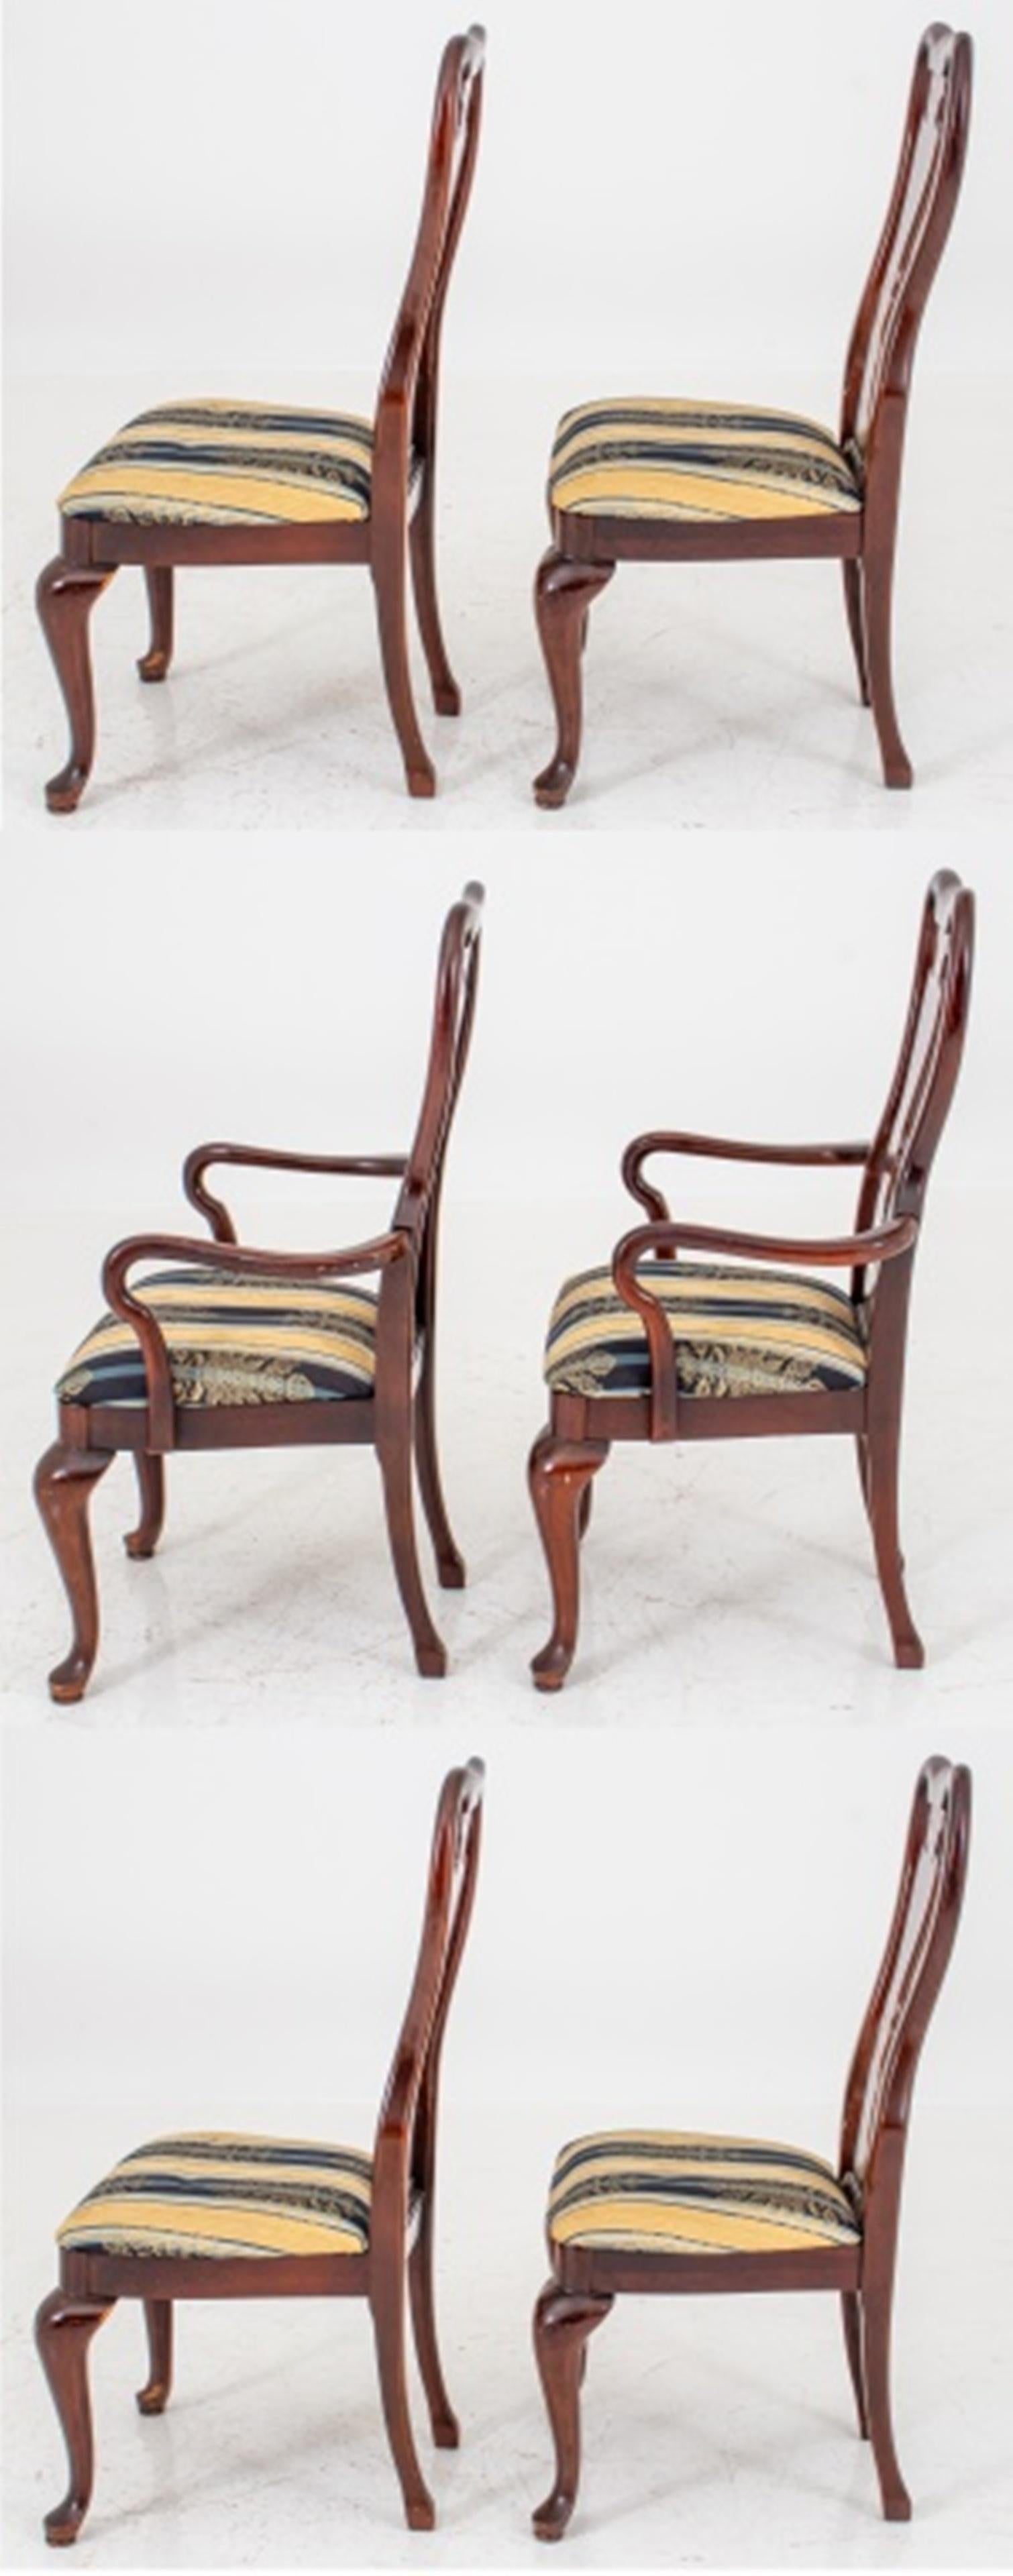 Set of six Queen Anne style dining chairs comprising four side chairs and two armchairs, with blue and beige upholstered seats. Measures: 40